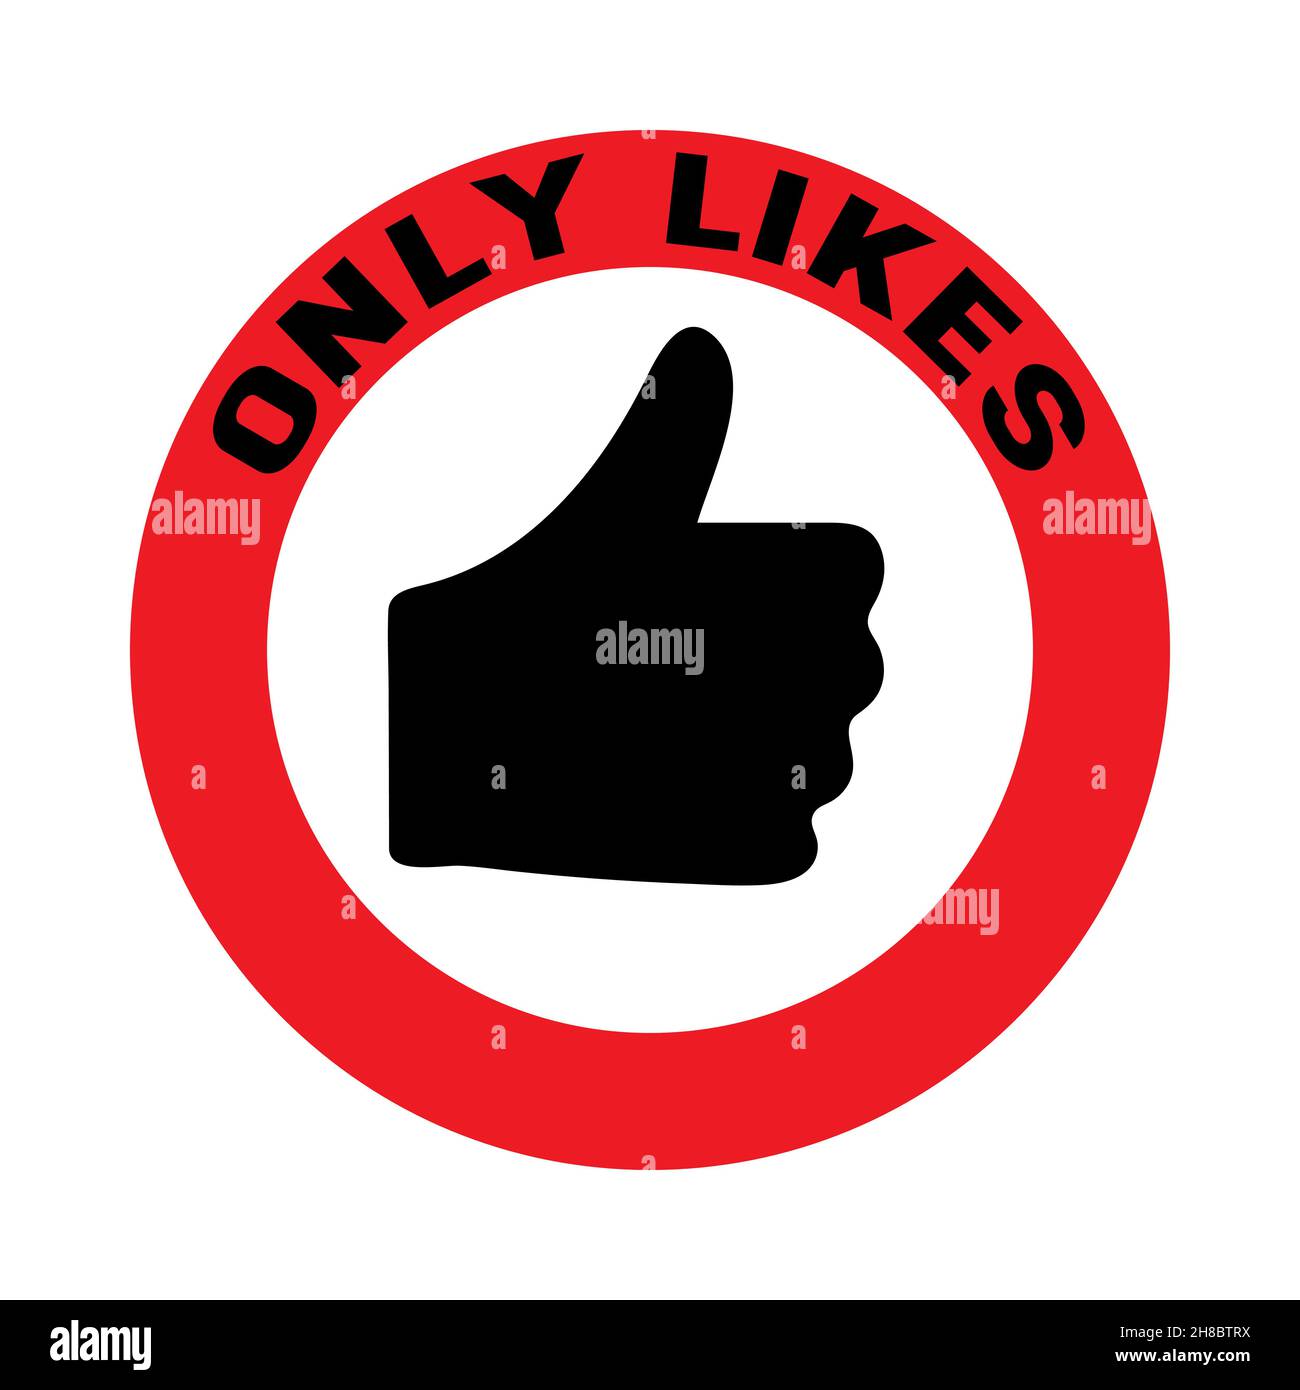 like hand gesture in red circle with slogan, internet communication free of negativity and bullying. Stock Vector